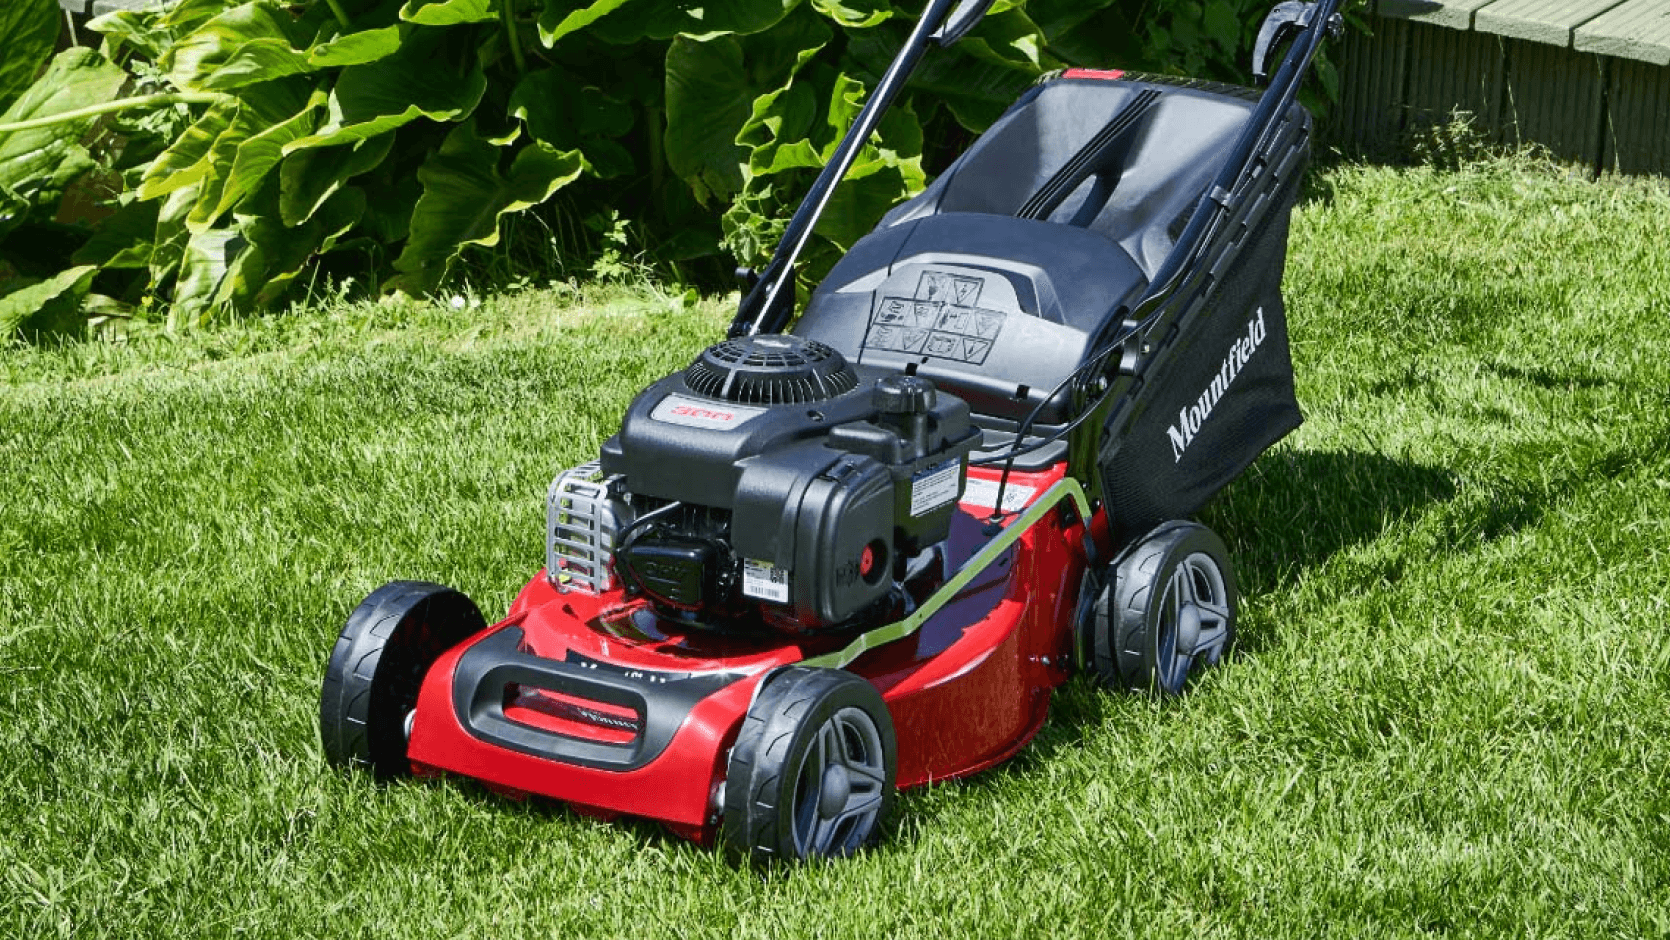 A red lawnmower sitting on short grass